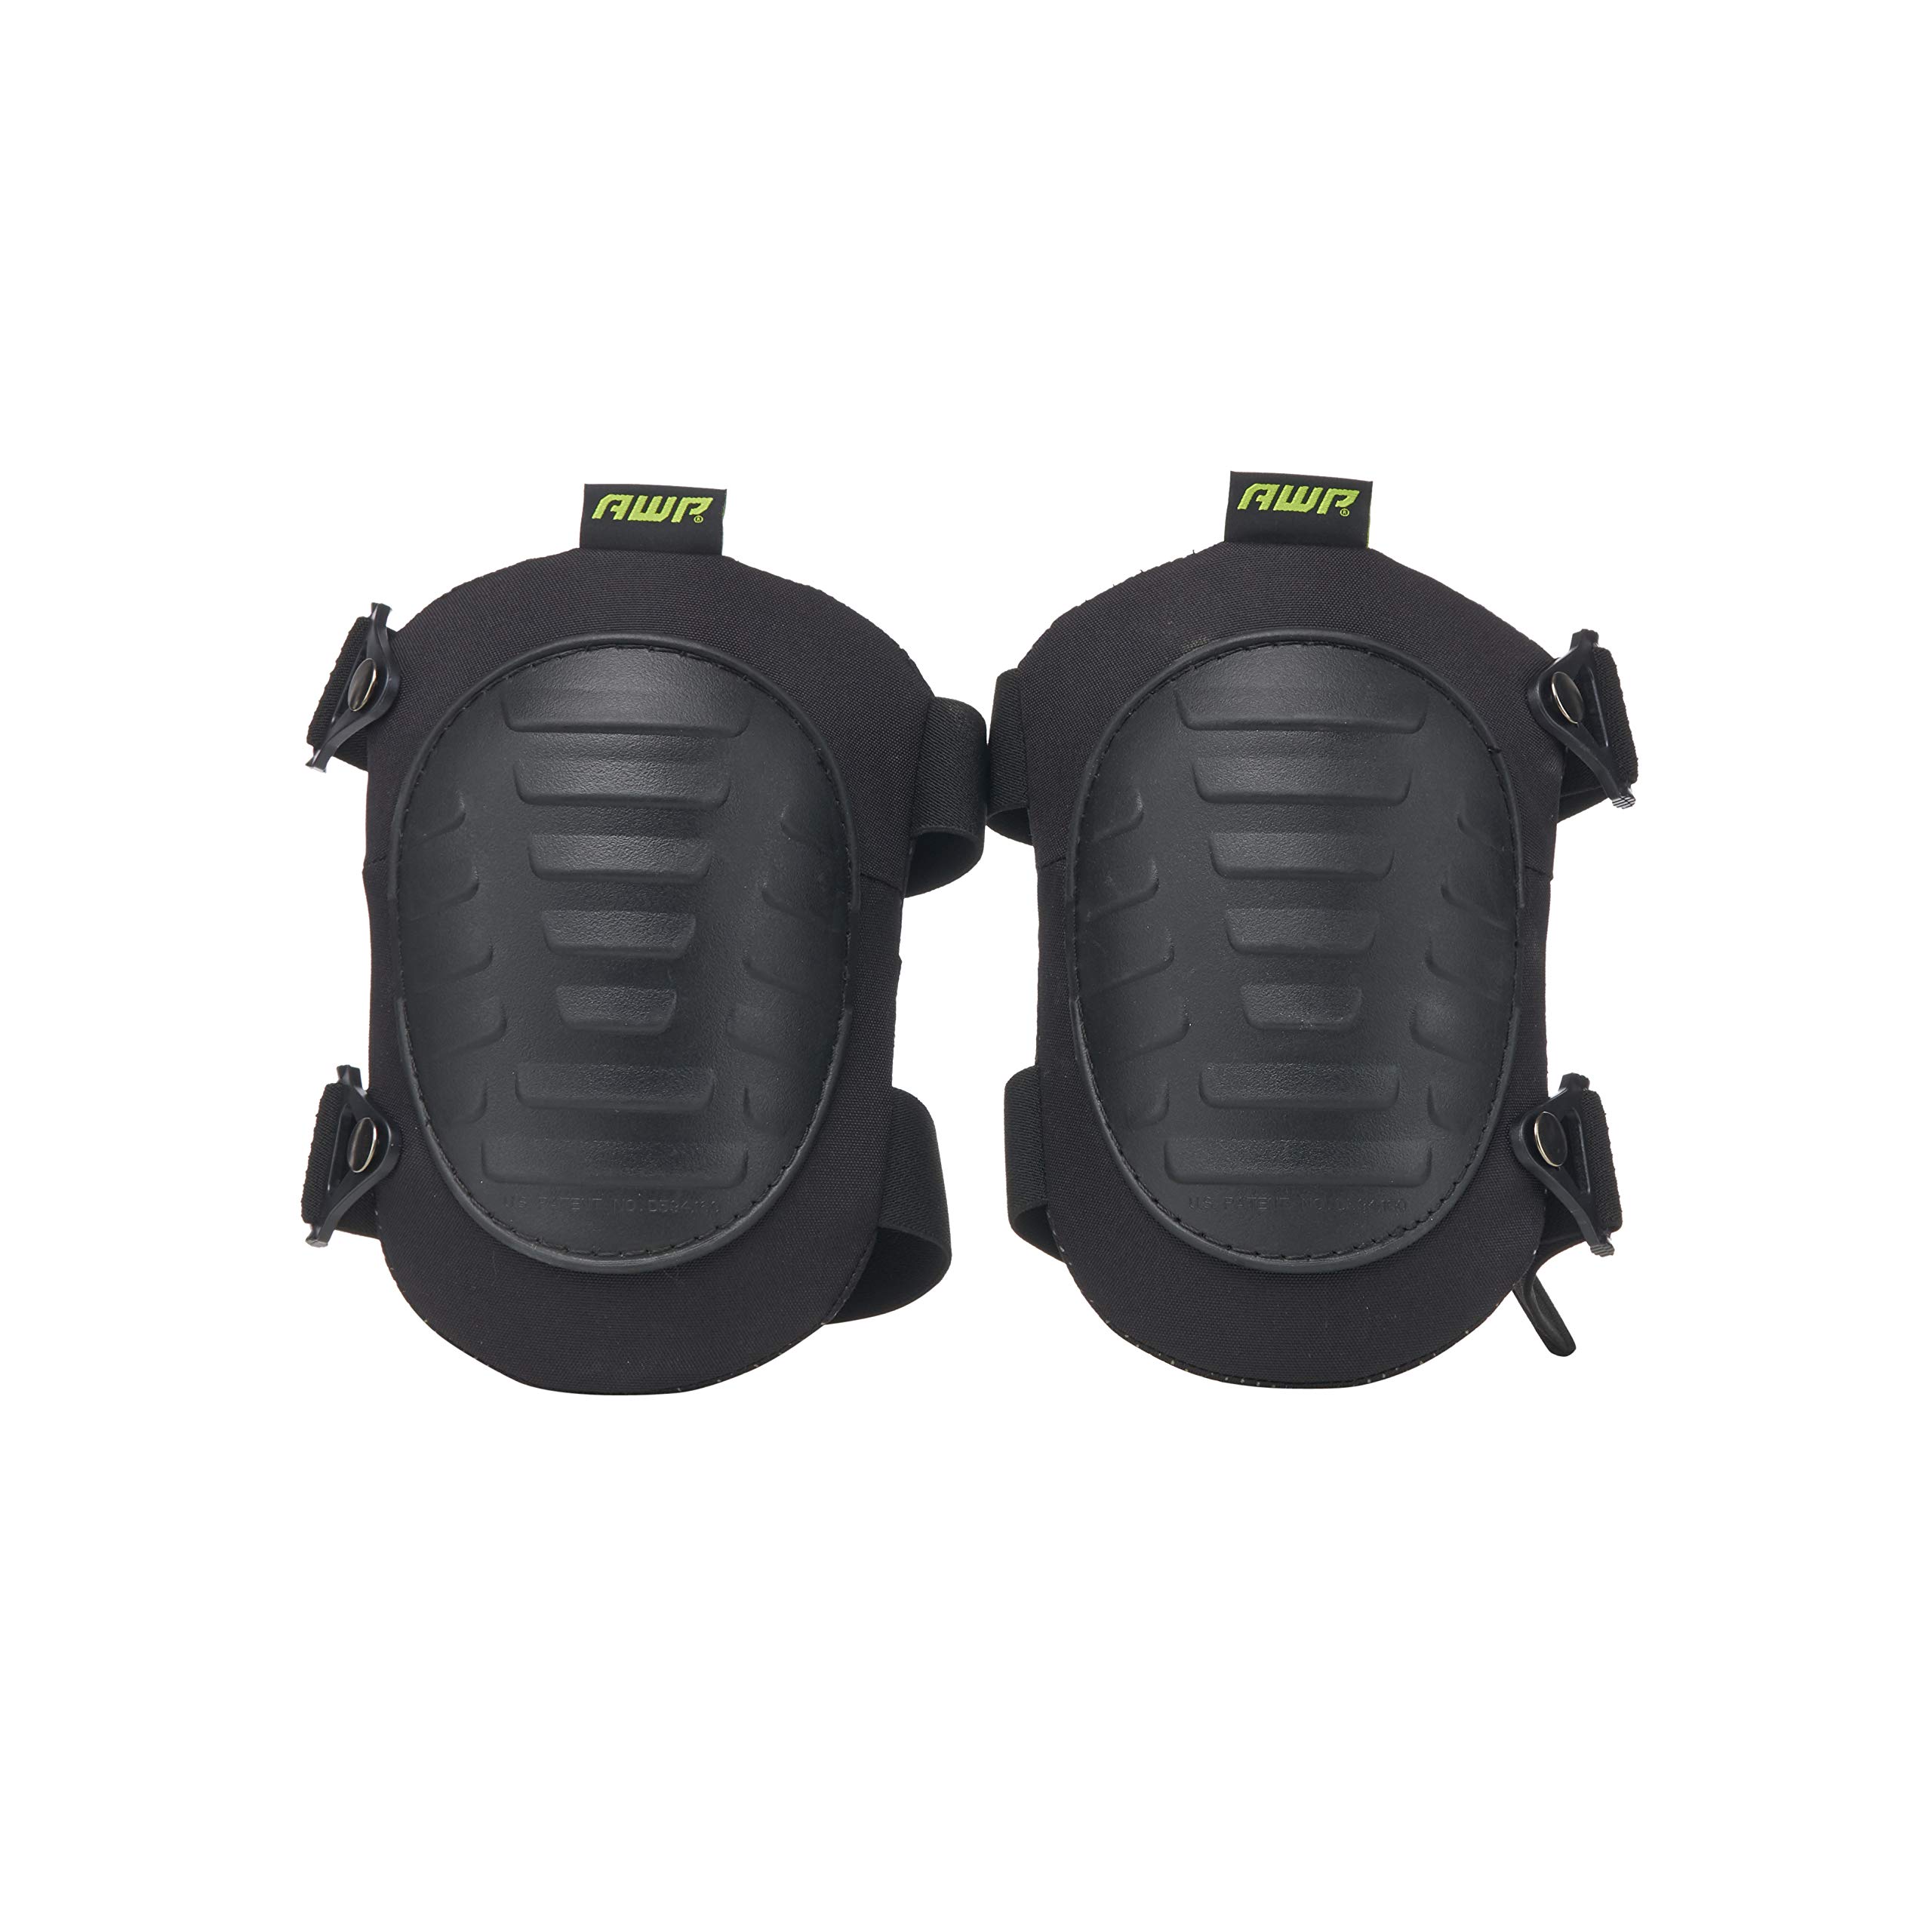 AWP Tactical Hard Cap Knee Pads | High Density Foam Padded Work Knee Pads | One Size